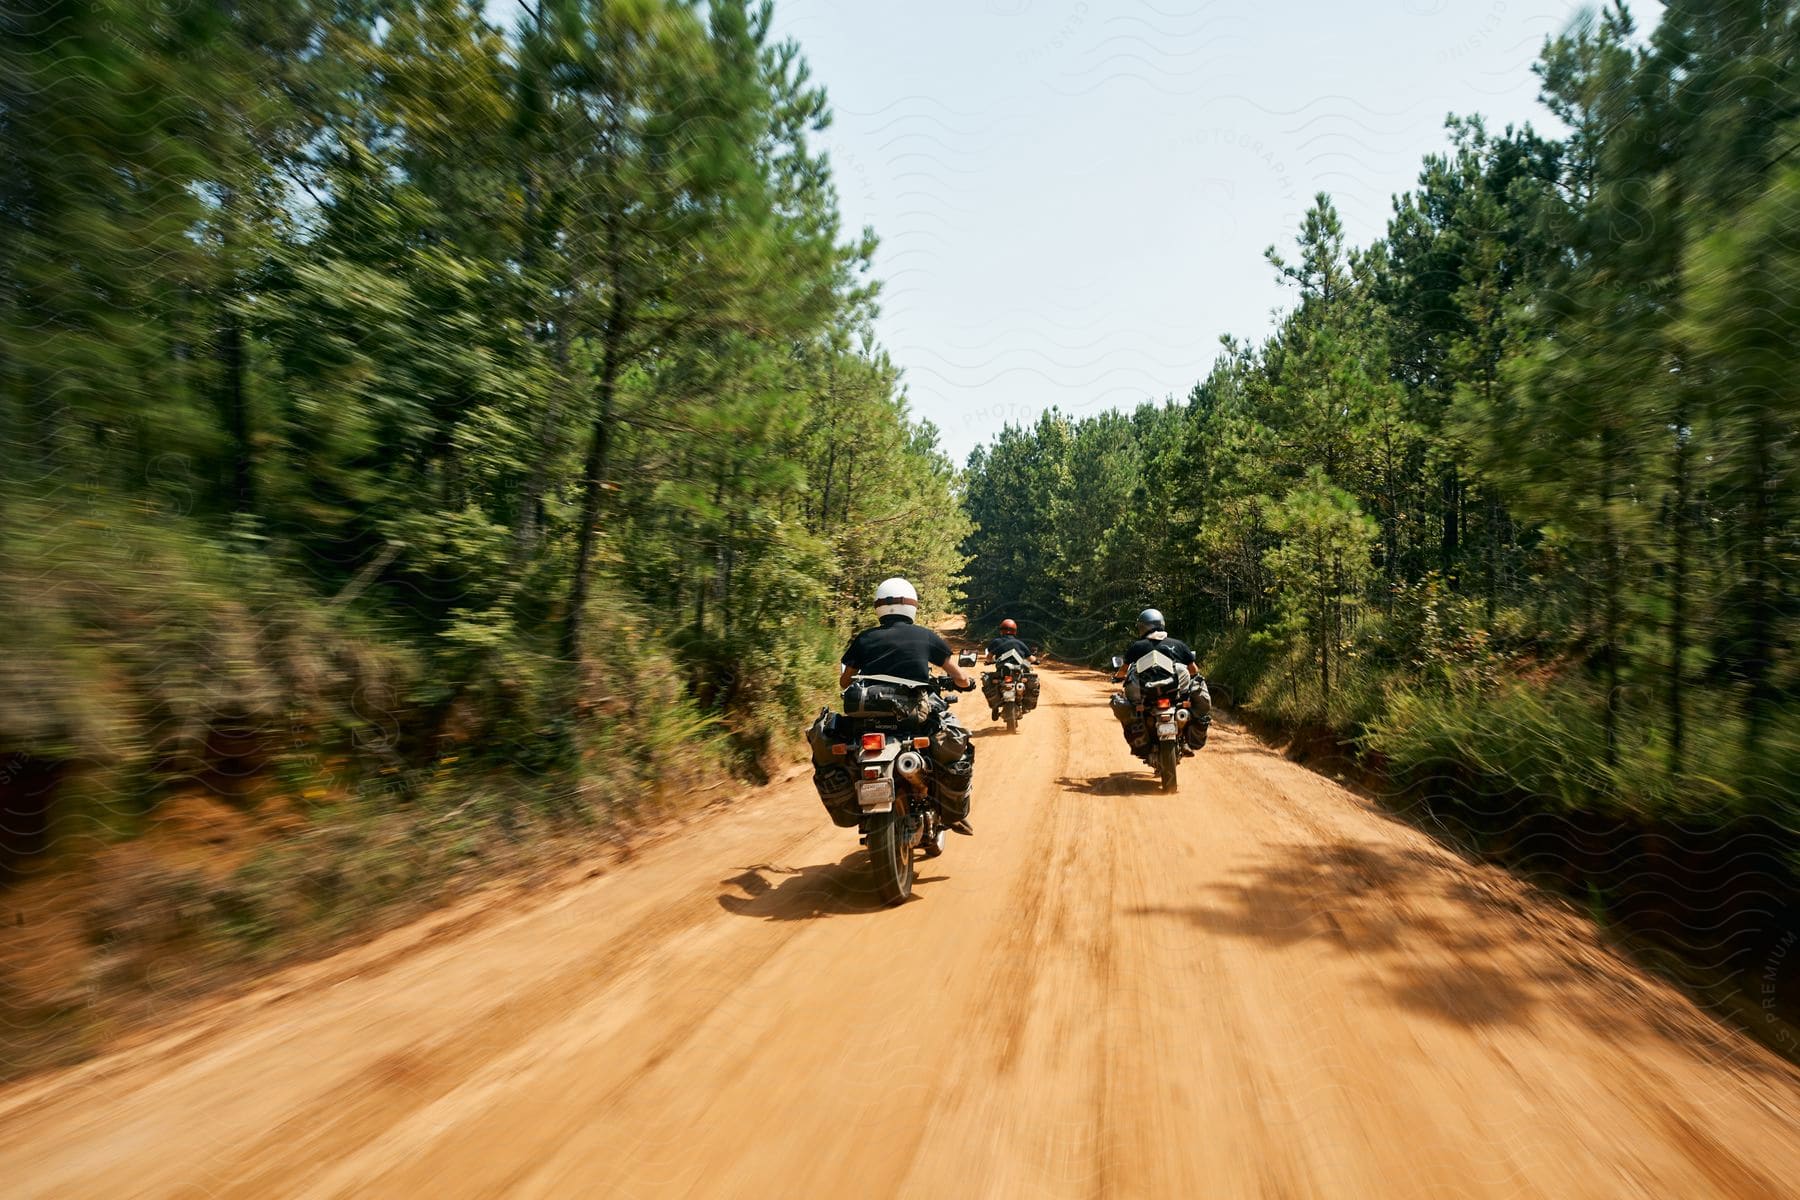 Three determined individuals on a motorcycle adventure surrounded by sky trees and the open road